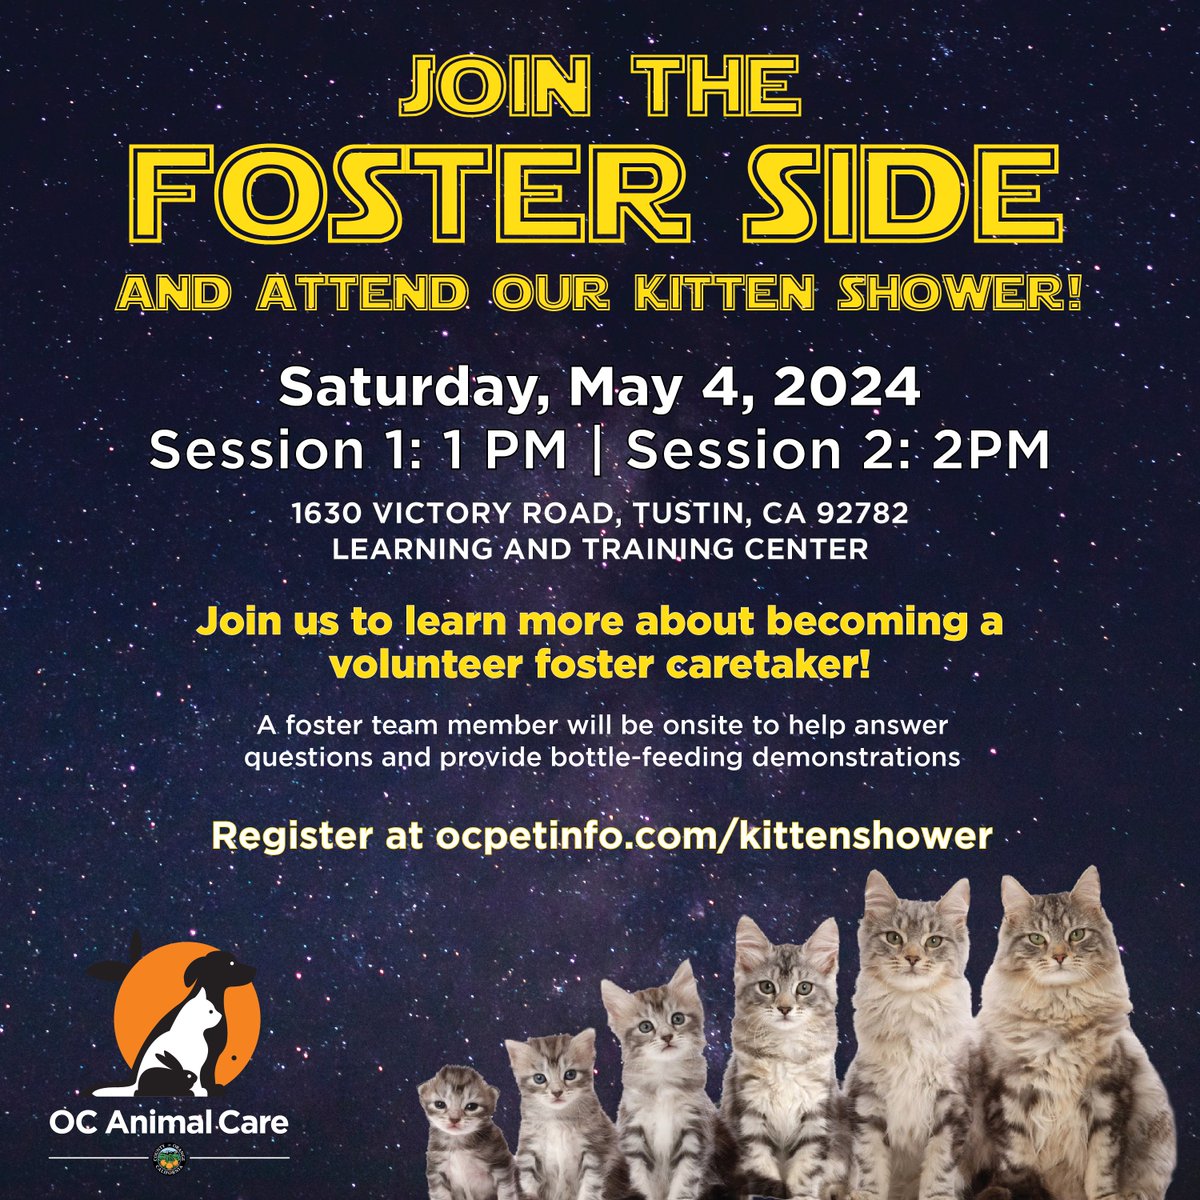 Our Kitten Shower is around the corner! Don’t forget to register for a session so you can learn about fostering. As a foster caretaker, you'll provide a safe and nurturing environment for kittens until they are ready for adoption.